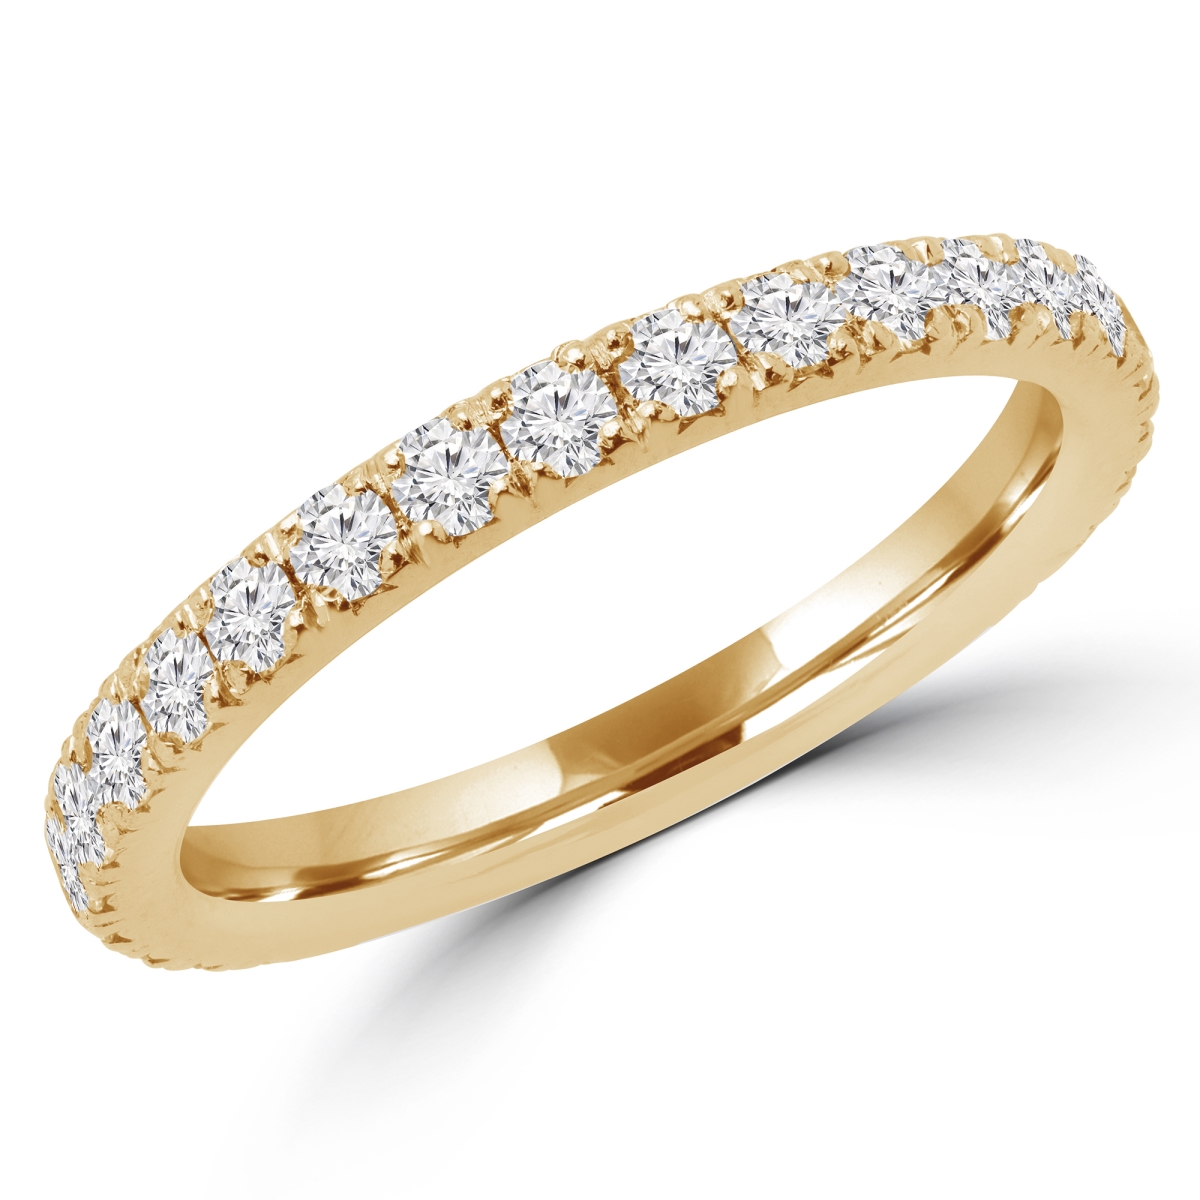 Picture of Majesty Diamonds MD180192-3.25 0.6 CTW Round Diamond Semi-Eternity Wedding Band Ring in 14K Yellow Gold - Size 3.25